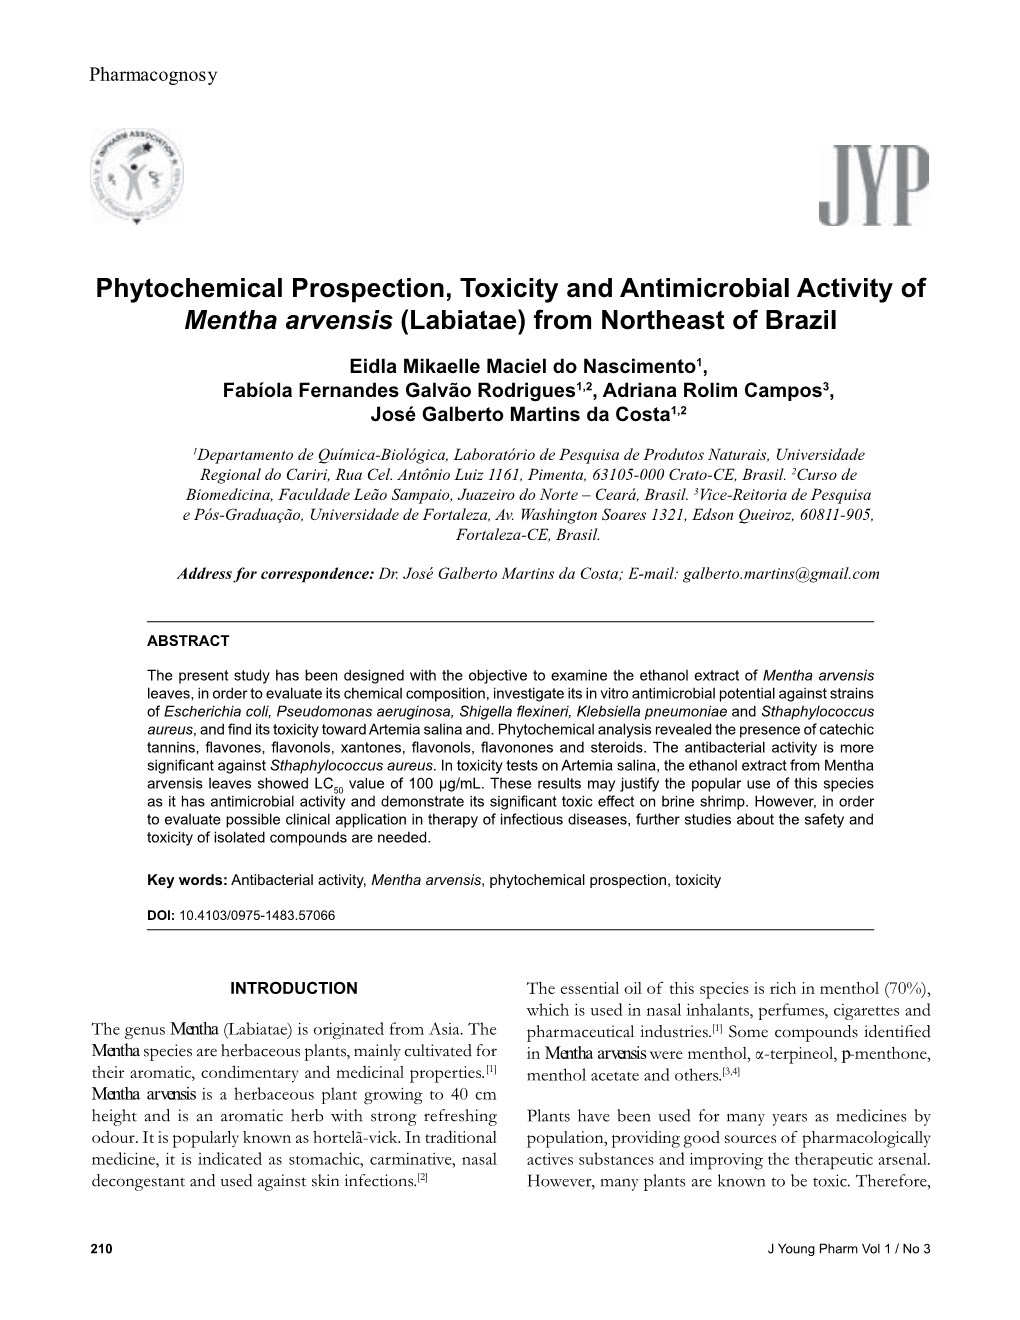 Phytochemical Prospection, Toxicity and Antimicrobial Activity of Mentha Arvensis (Labiatae) from Northeast of Brazil